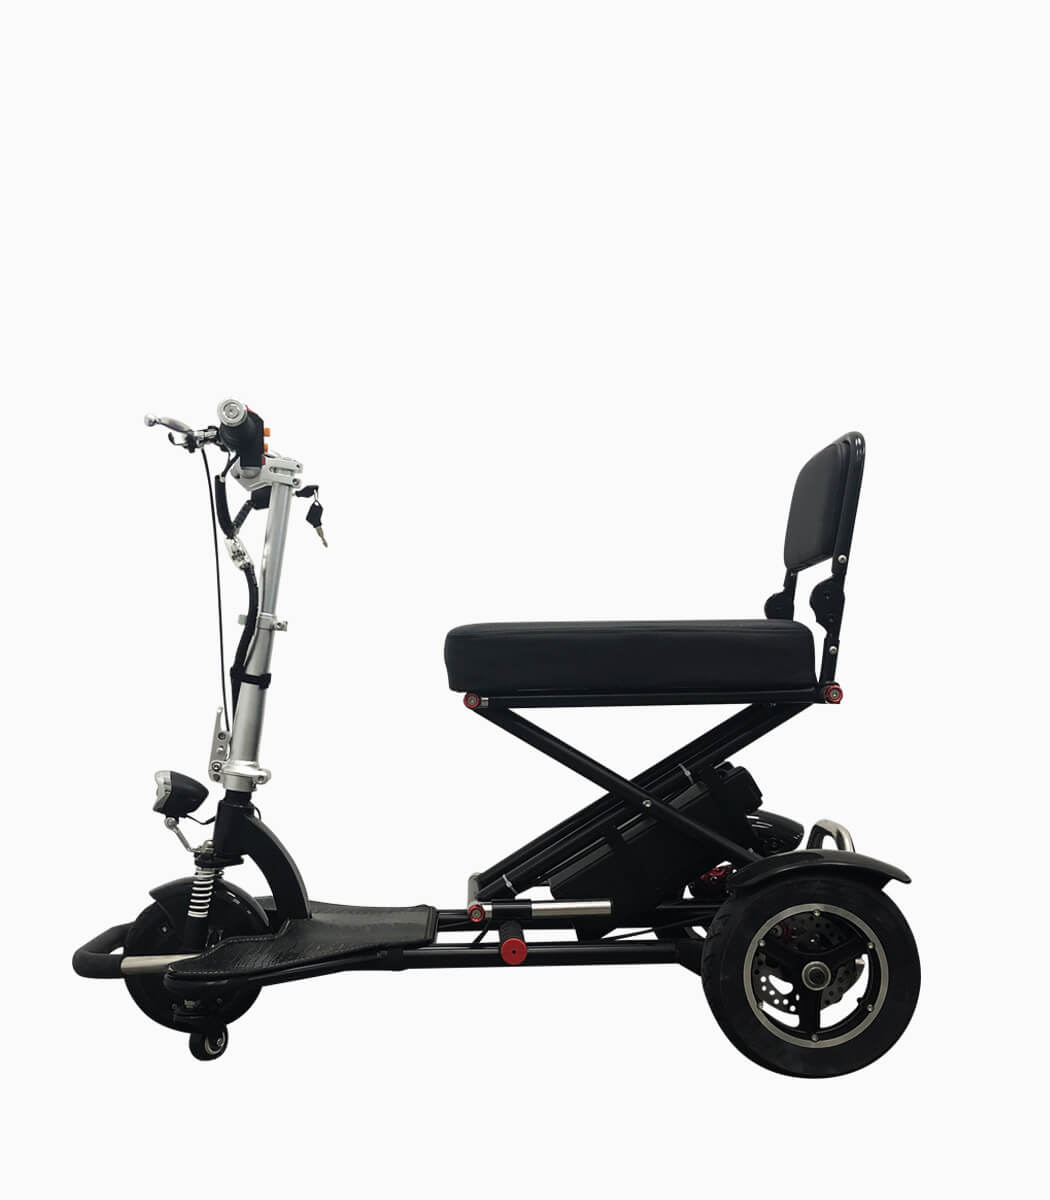 MOBOT FLEXI MAX BLACK12AH 3 wheel mobility scooter left - Top 3 best foldable mobility scooters in Singapore